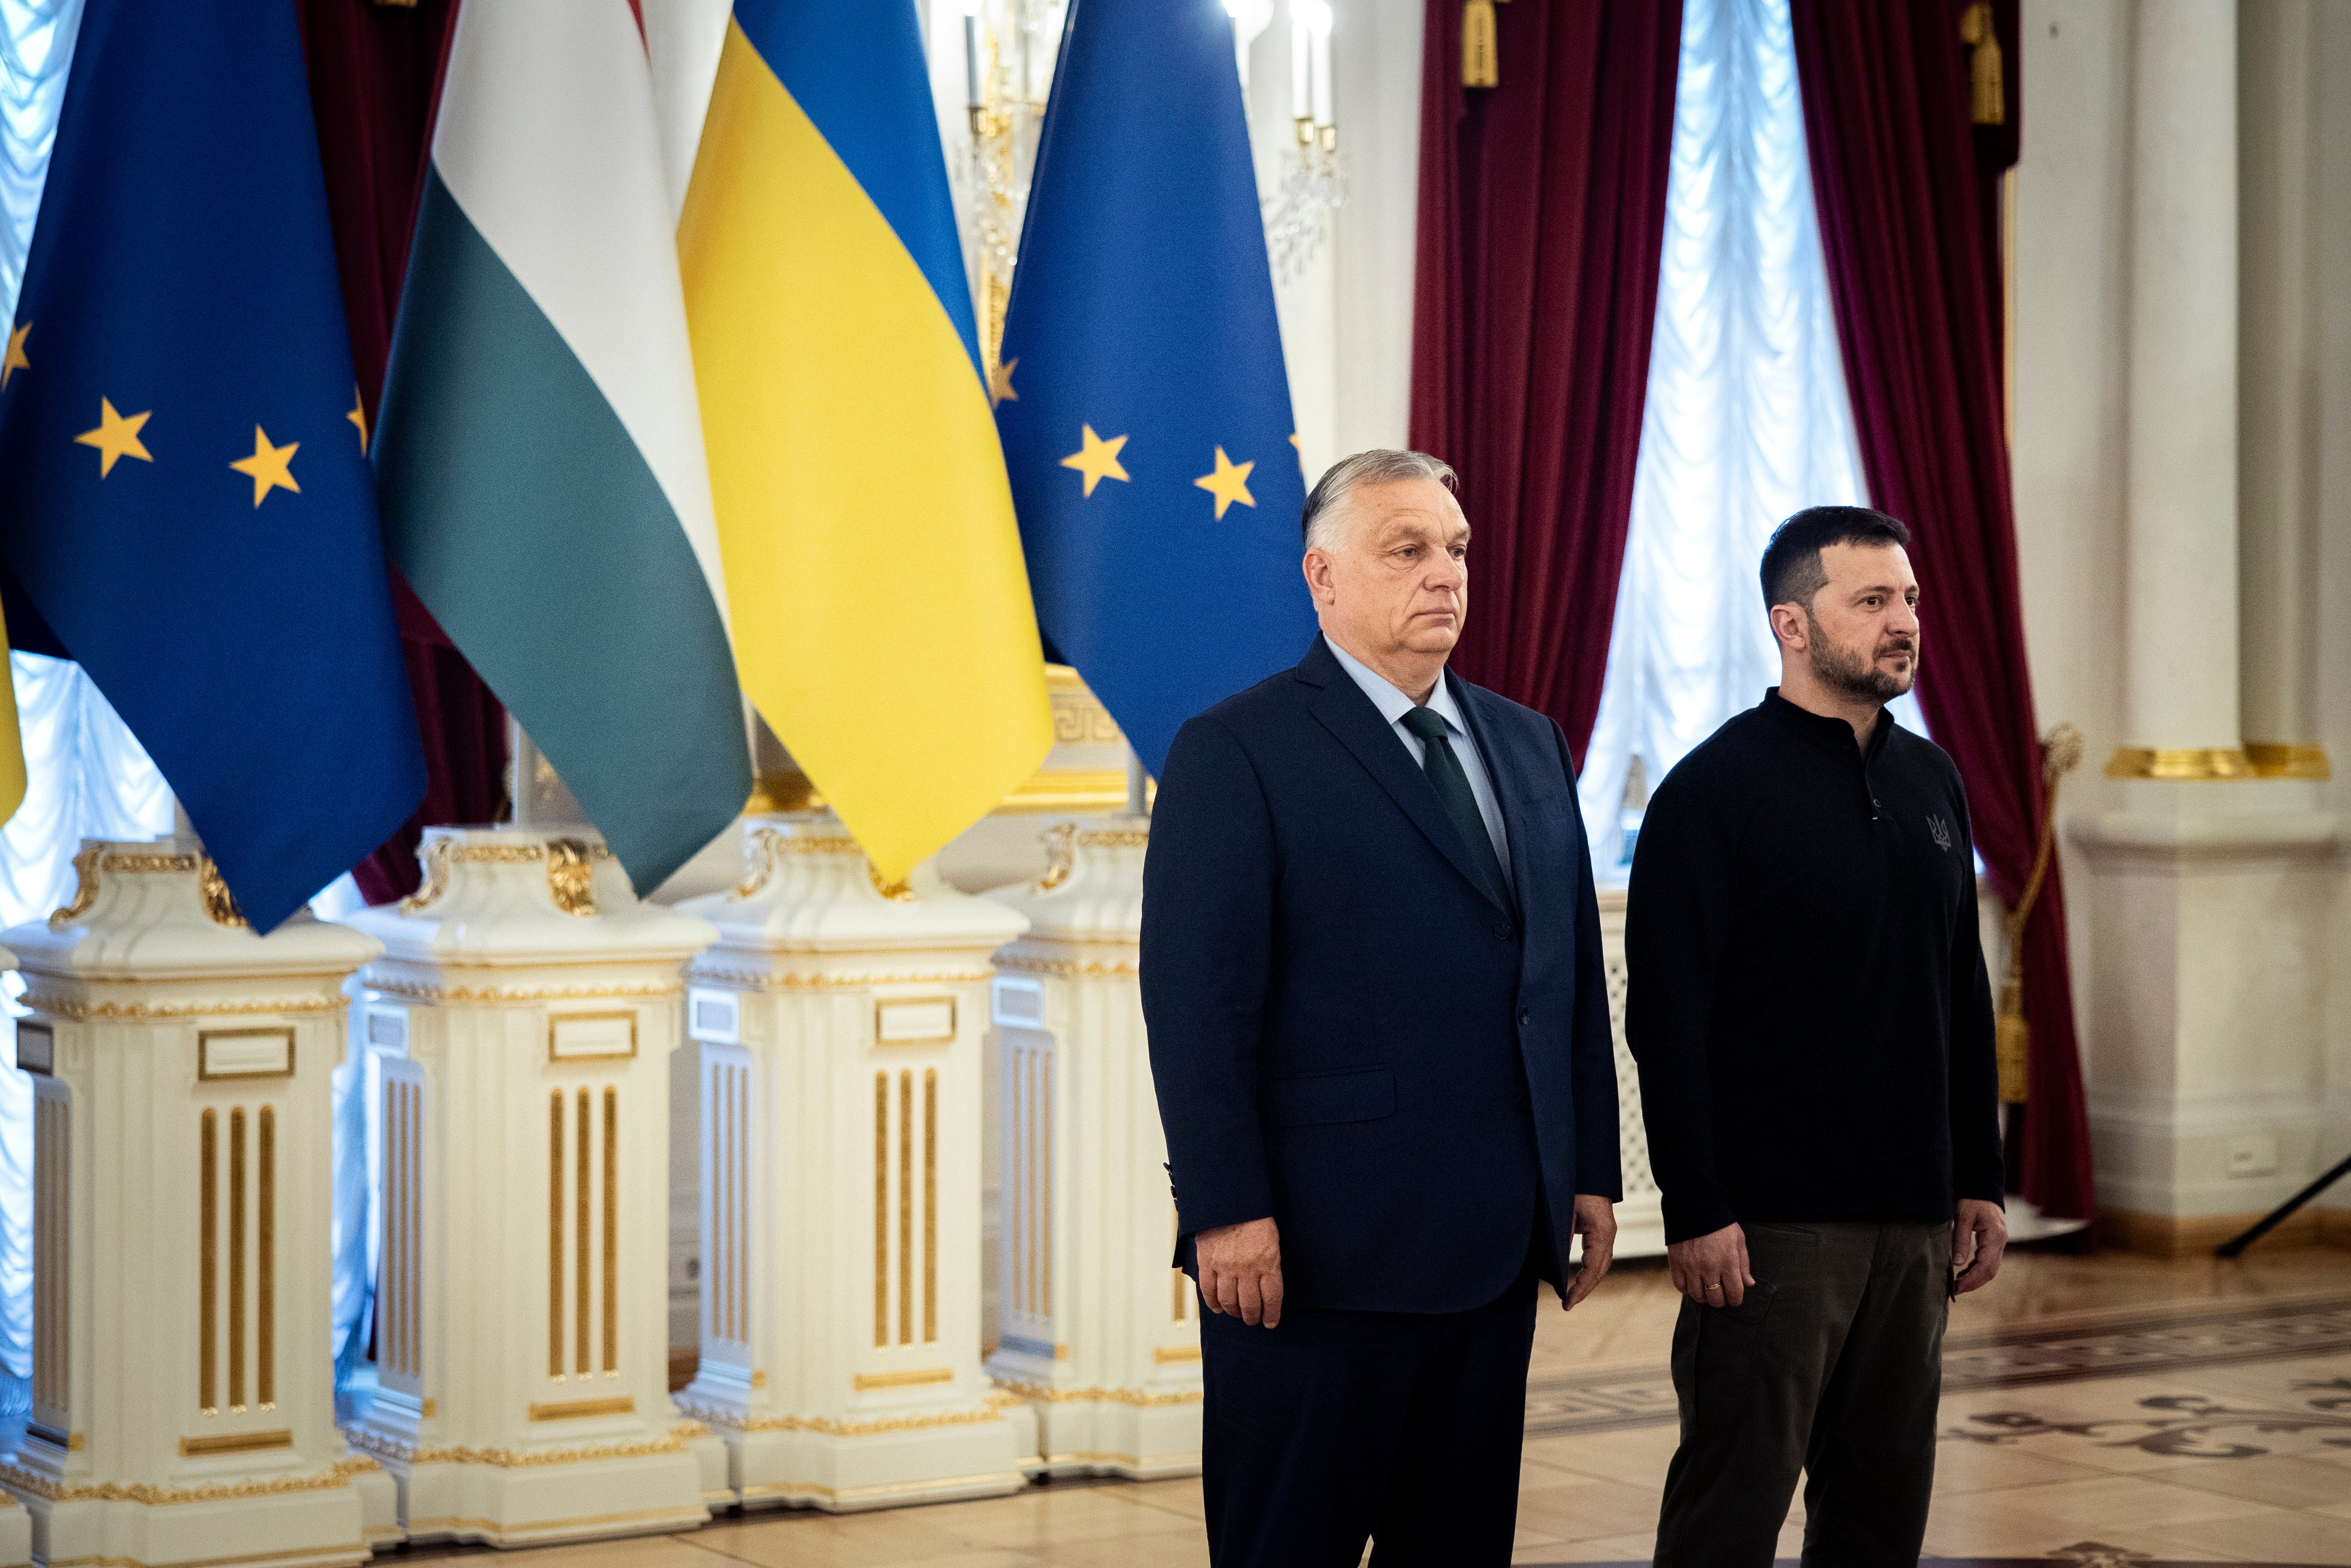 Hungarian PM Viktor Orban stands with Ukrainian president Volodymyr Zelensky in front of the European Union, Hungarian and Ukrainian flags